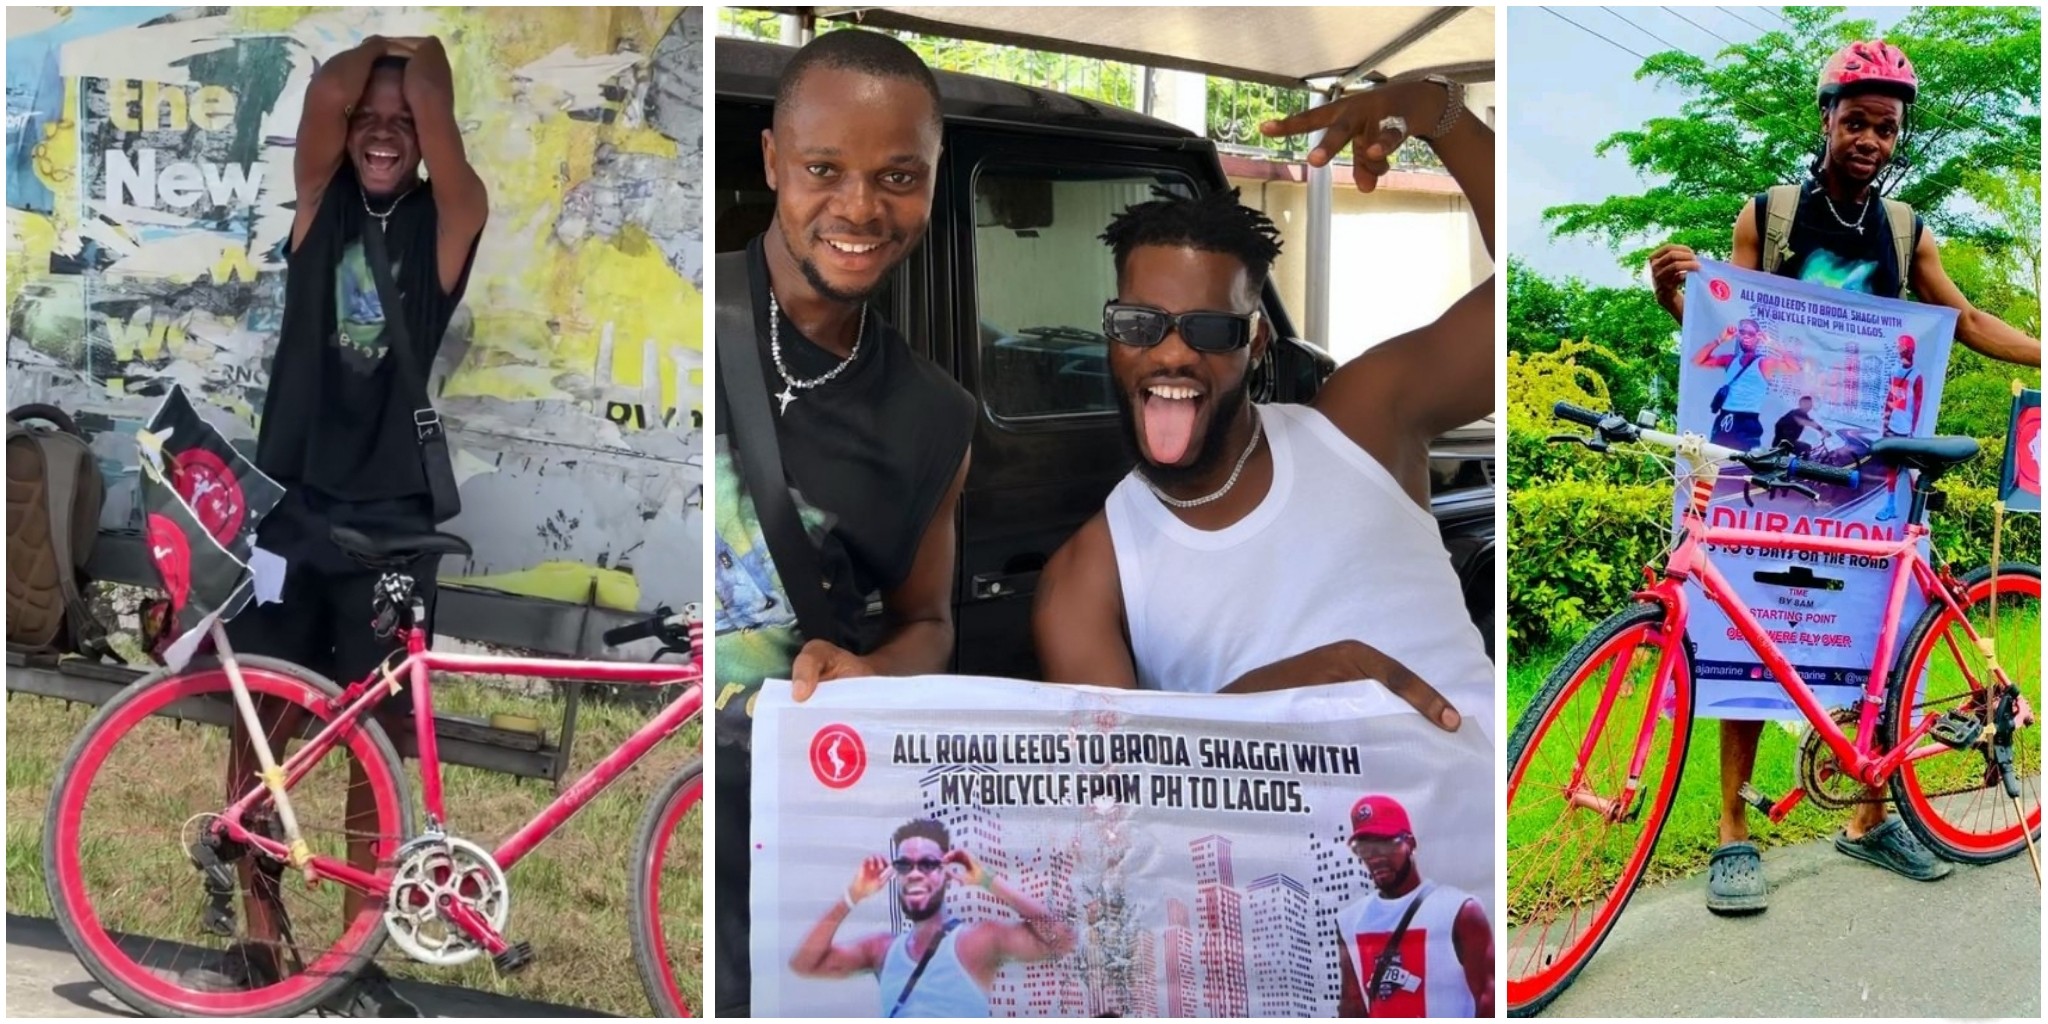 Fan ecstatic as he meets Broda Shaggy after cycling from Port Harcourt to Lagos for 6 days to see him